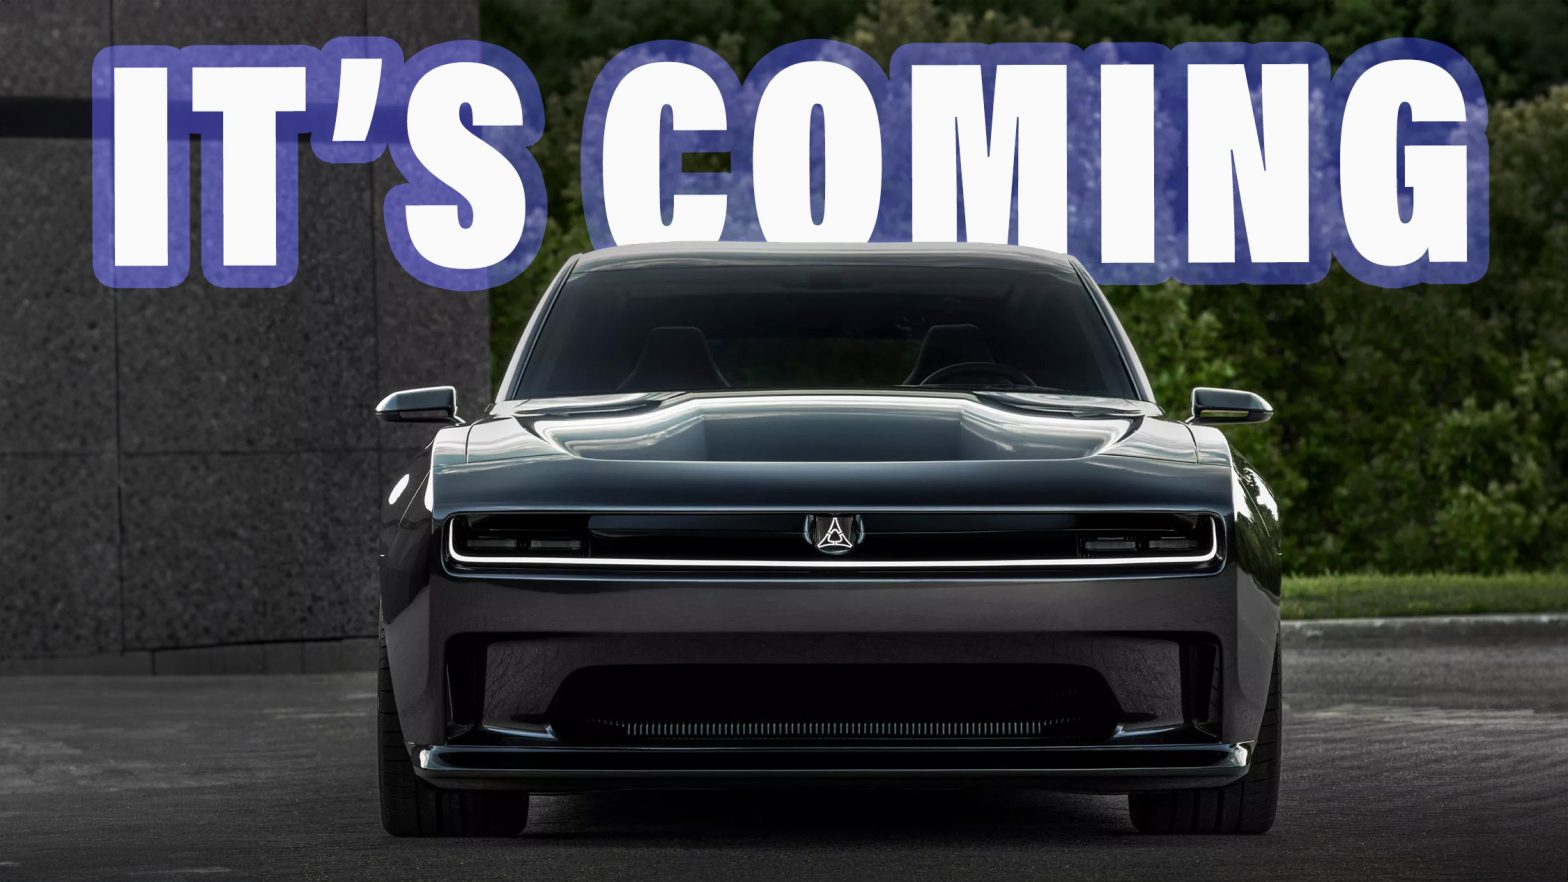 New Dodge Charger: Here’s What We Know – What’s On Your Wishlist?